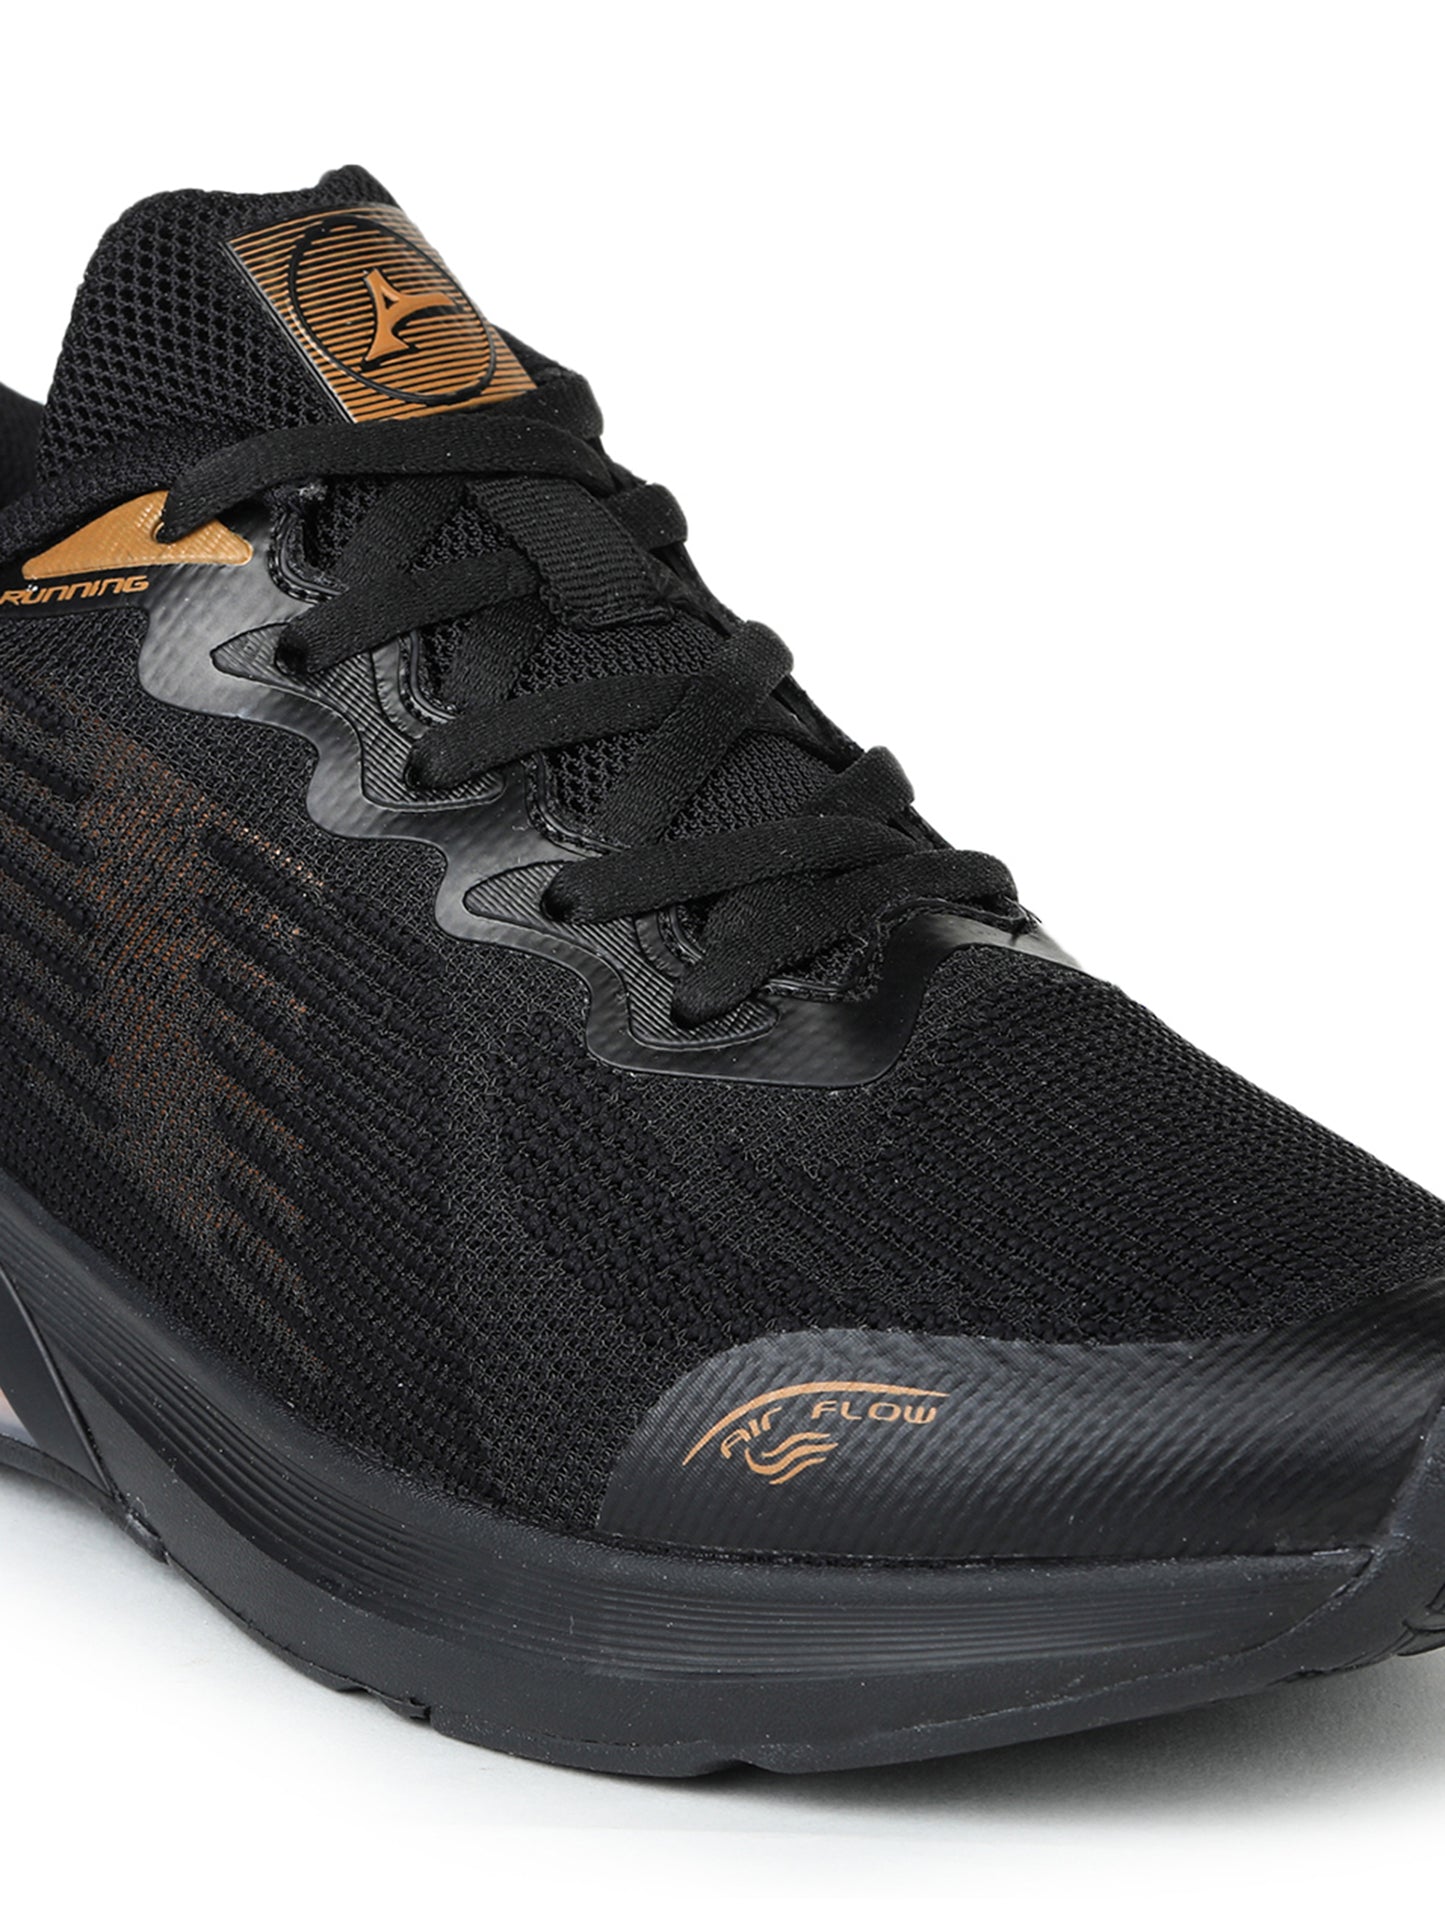 ABROS LETHAL SPORT-SHOES For MEN'S